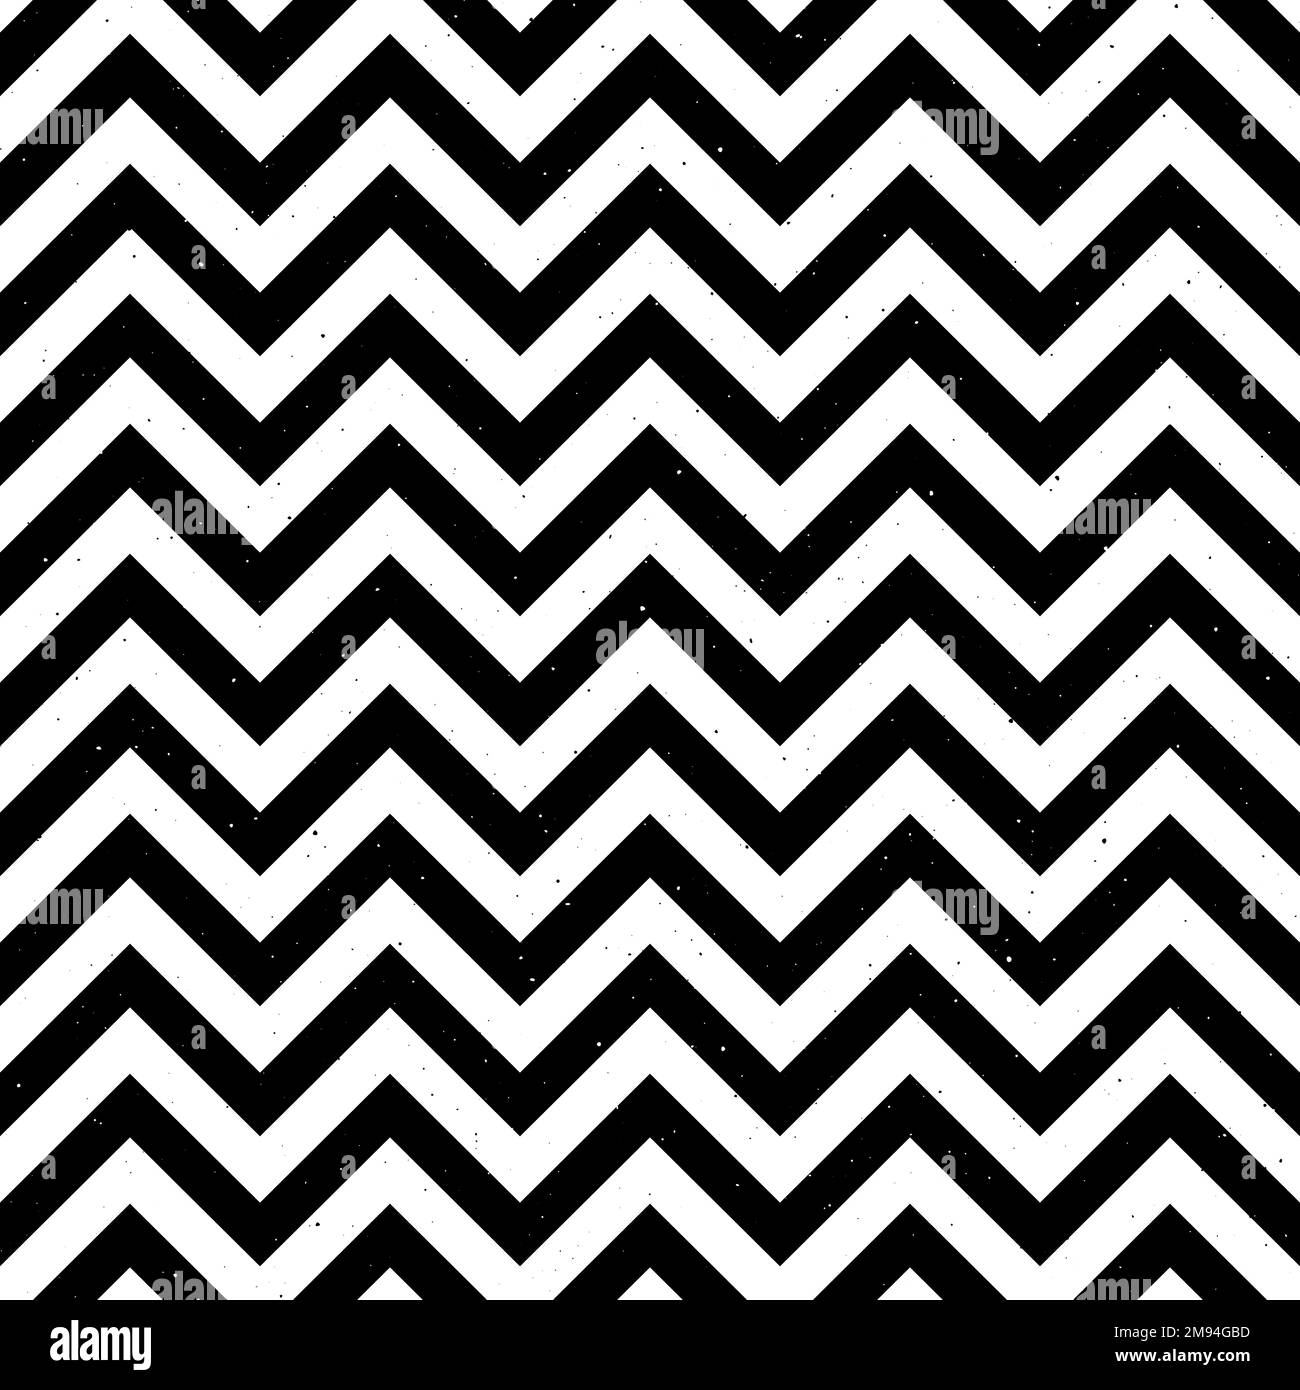 Grunge zigzag seamless pattern. Black and white chevron fabric texture. Abstract zig zag background. Repeating vector Stock Vector